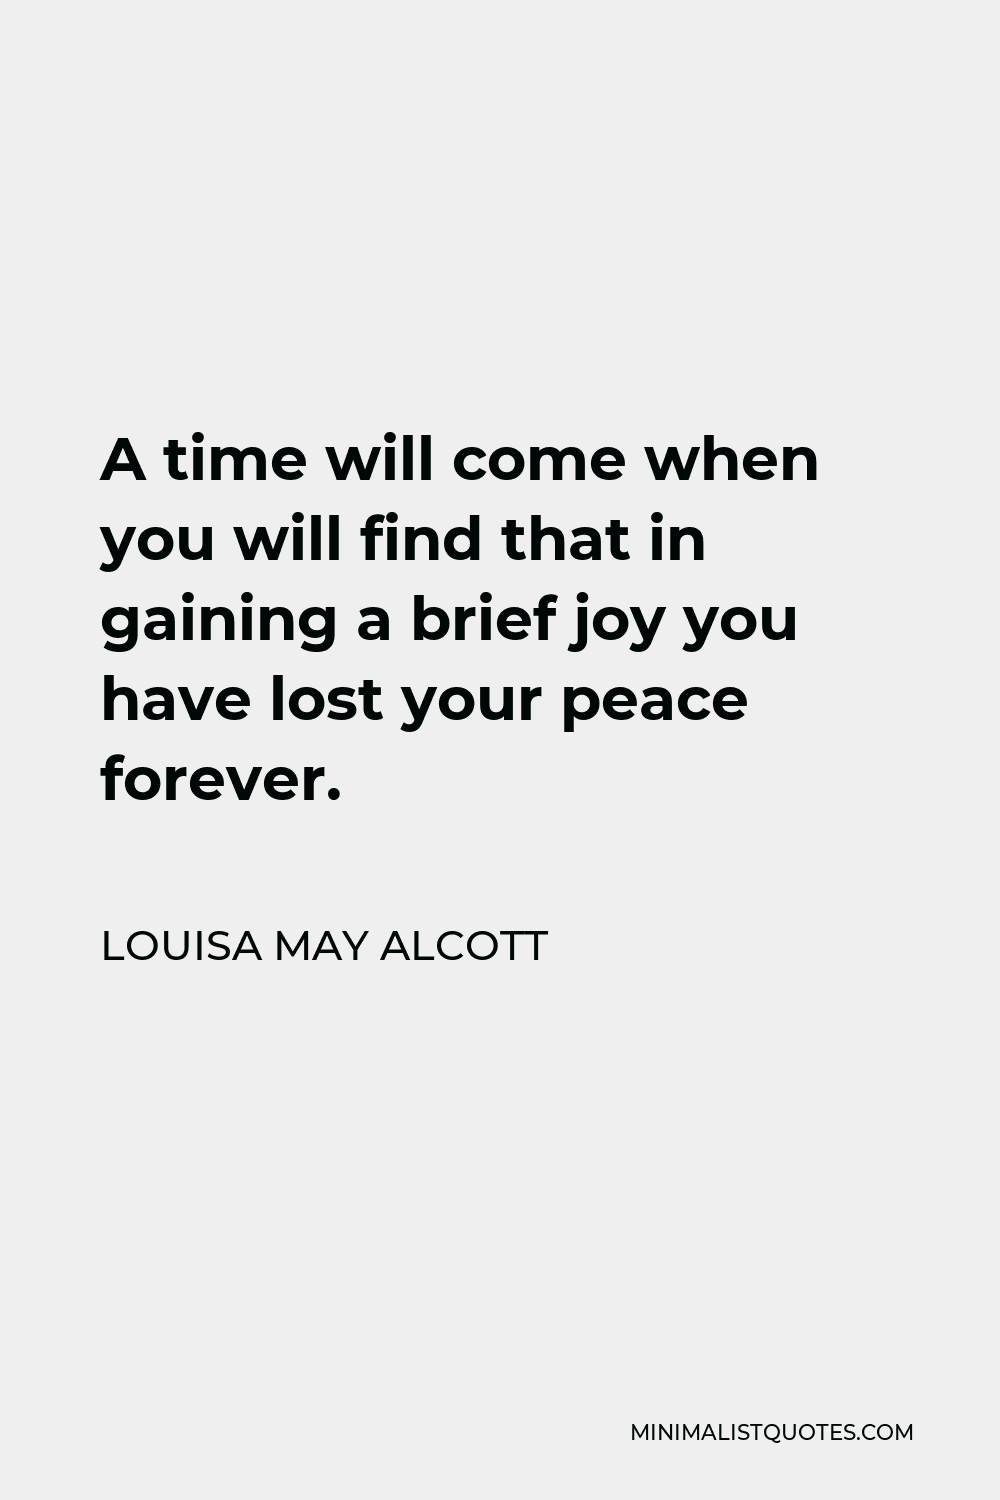 Louisa May Alcott Quote - A time will come when you will find that in gaining a brief joy you have lost your peace forever.